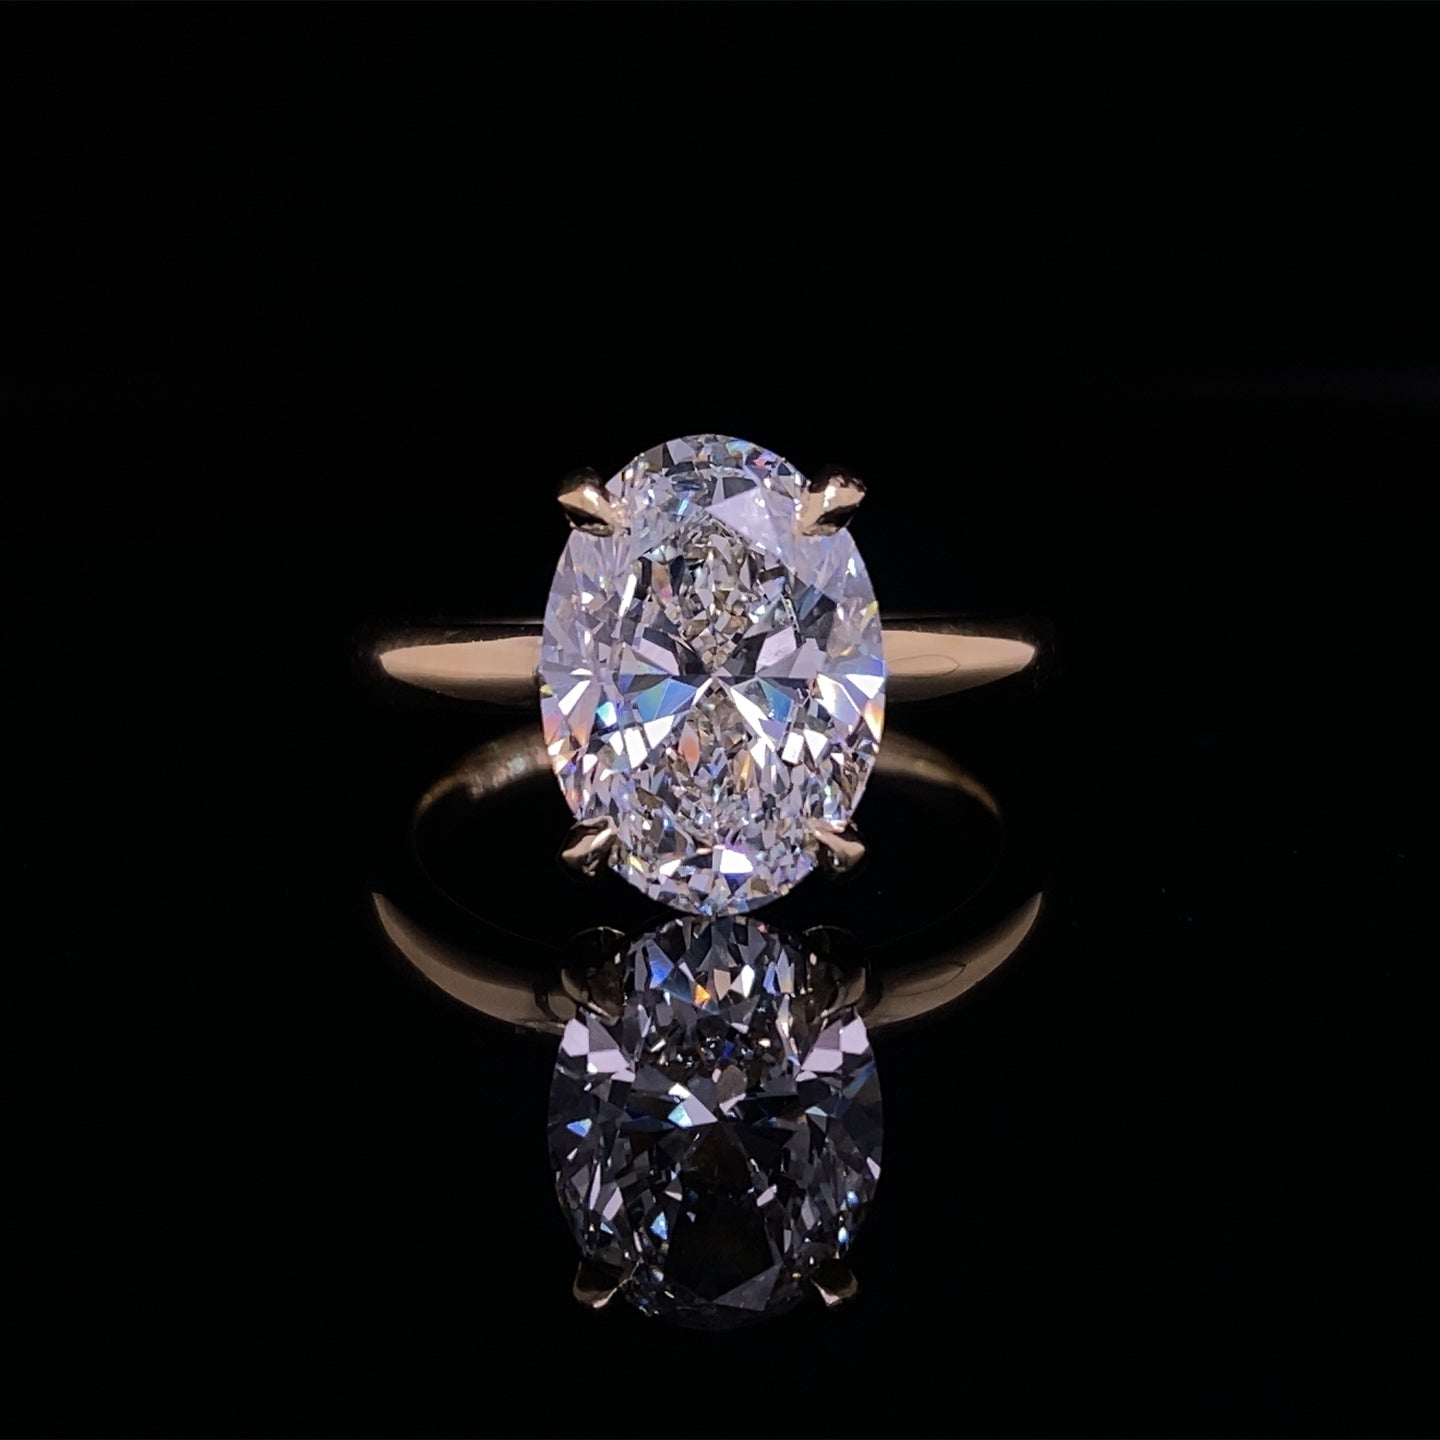 4.00ct Oval Diamond Engagement Ring in 18K Yellow Gold (Lab Grown)